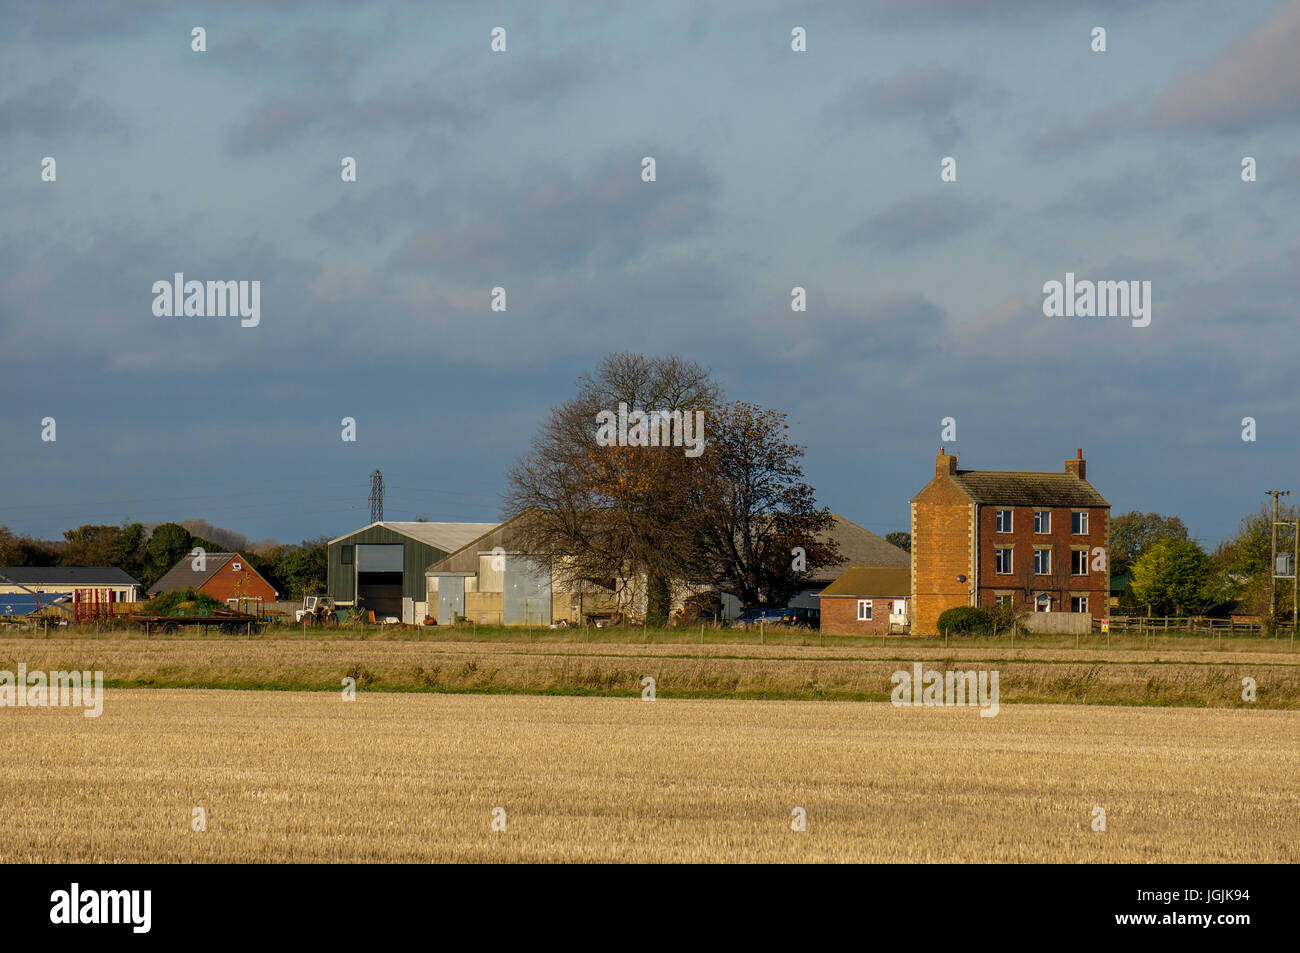 Flat field landscape of farm buildings and house in a rural part of Baston, Lincolnshire, England, UK. Stock Photo